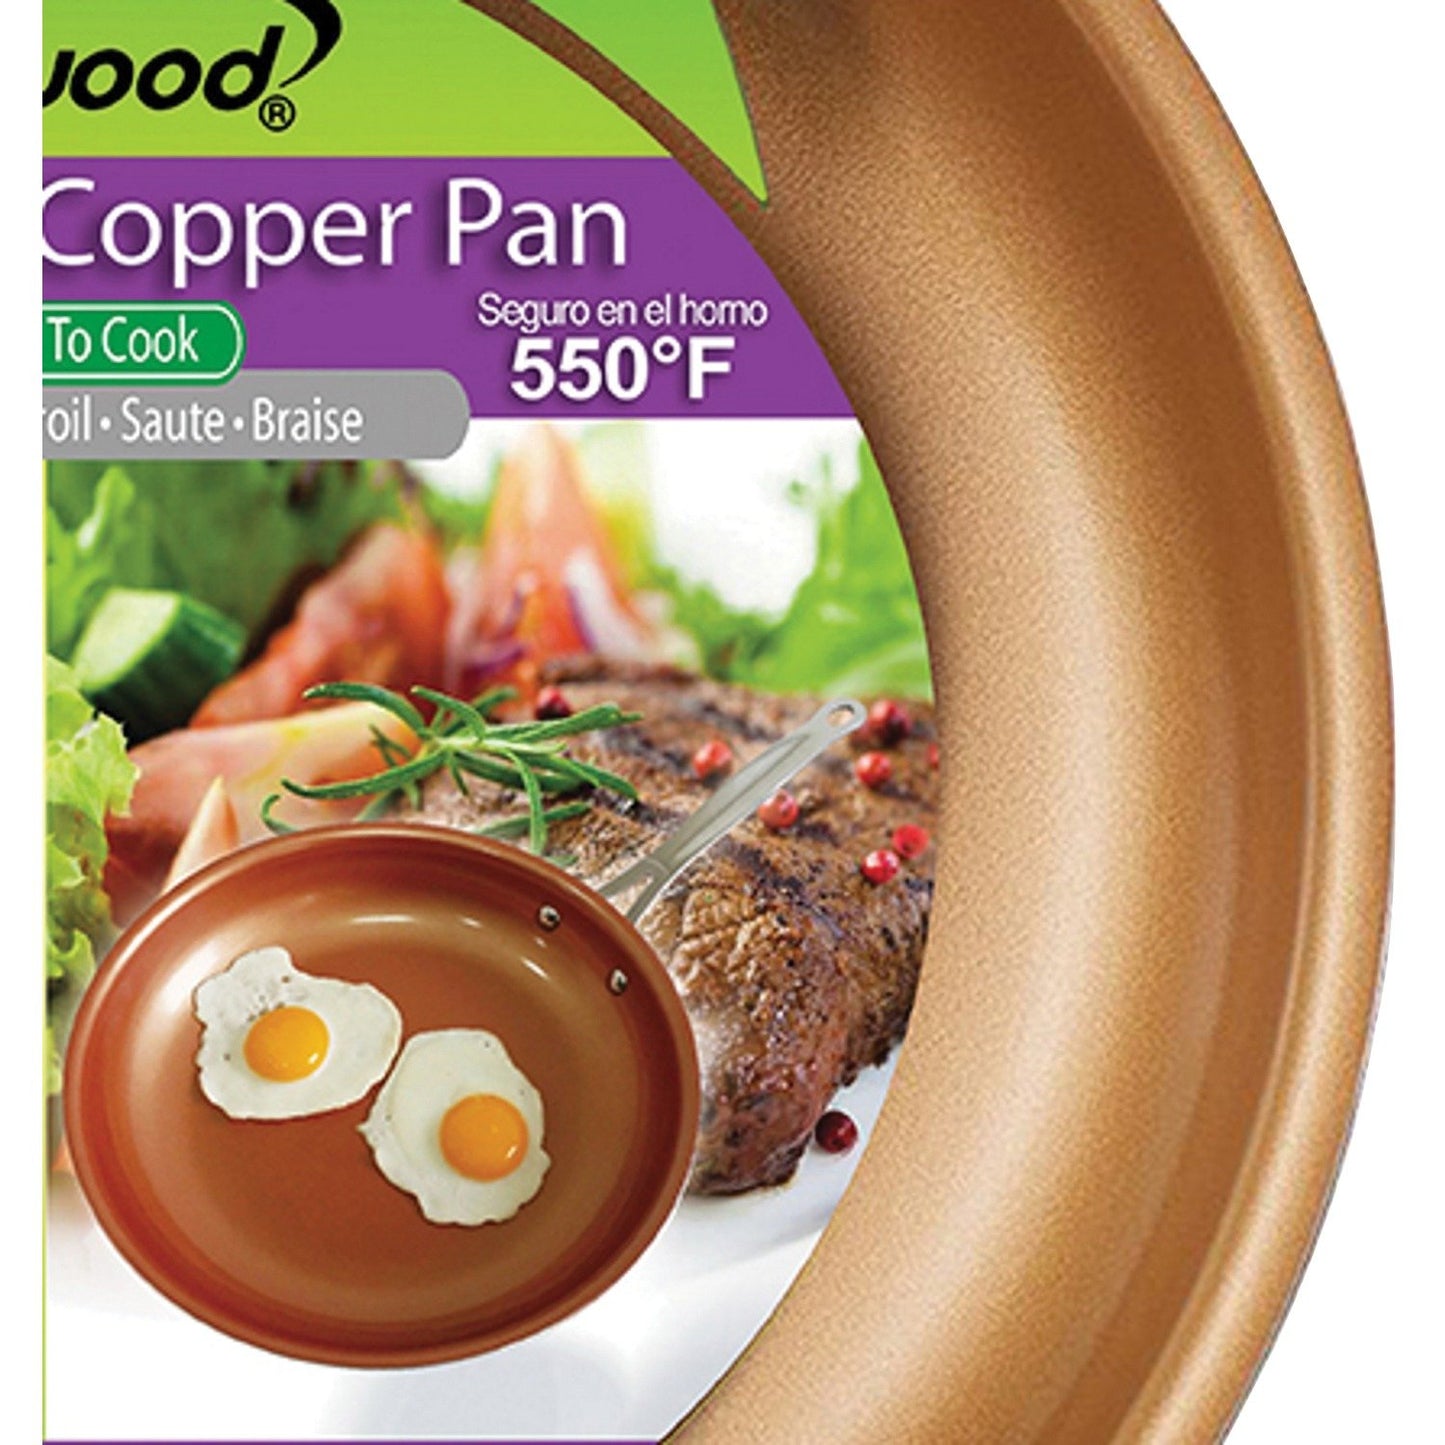 Brentwood Appl. BFP-320C Non Stick Induction Copper Frying Pan (8 Inch)